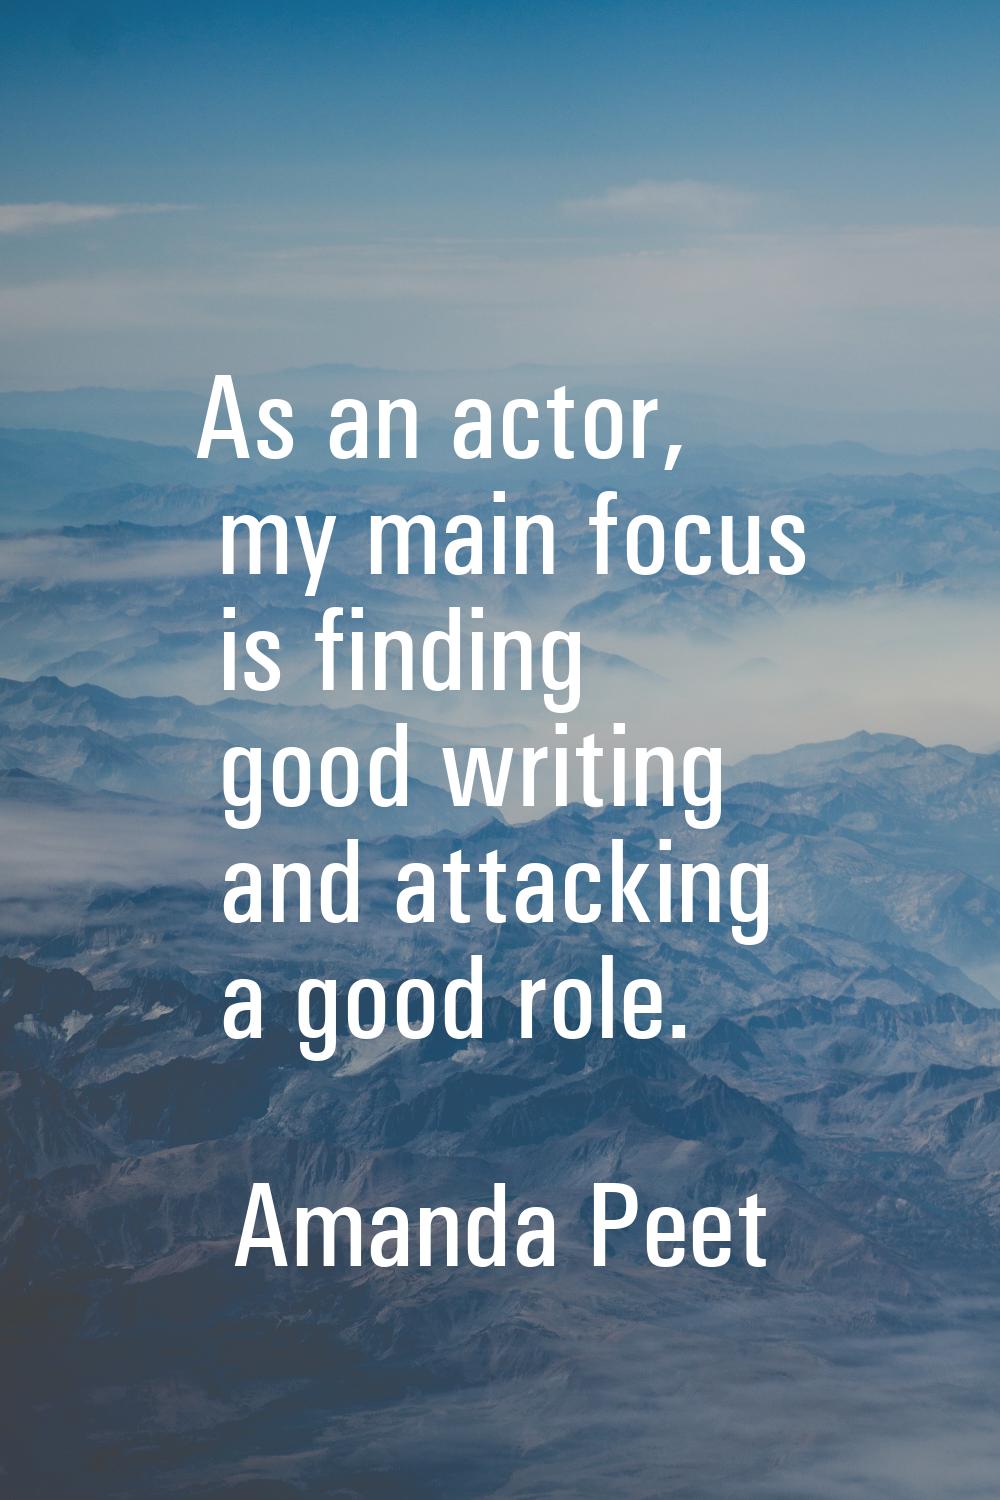 As an actor, my main focus is finding good writing and attacking a good role.